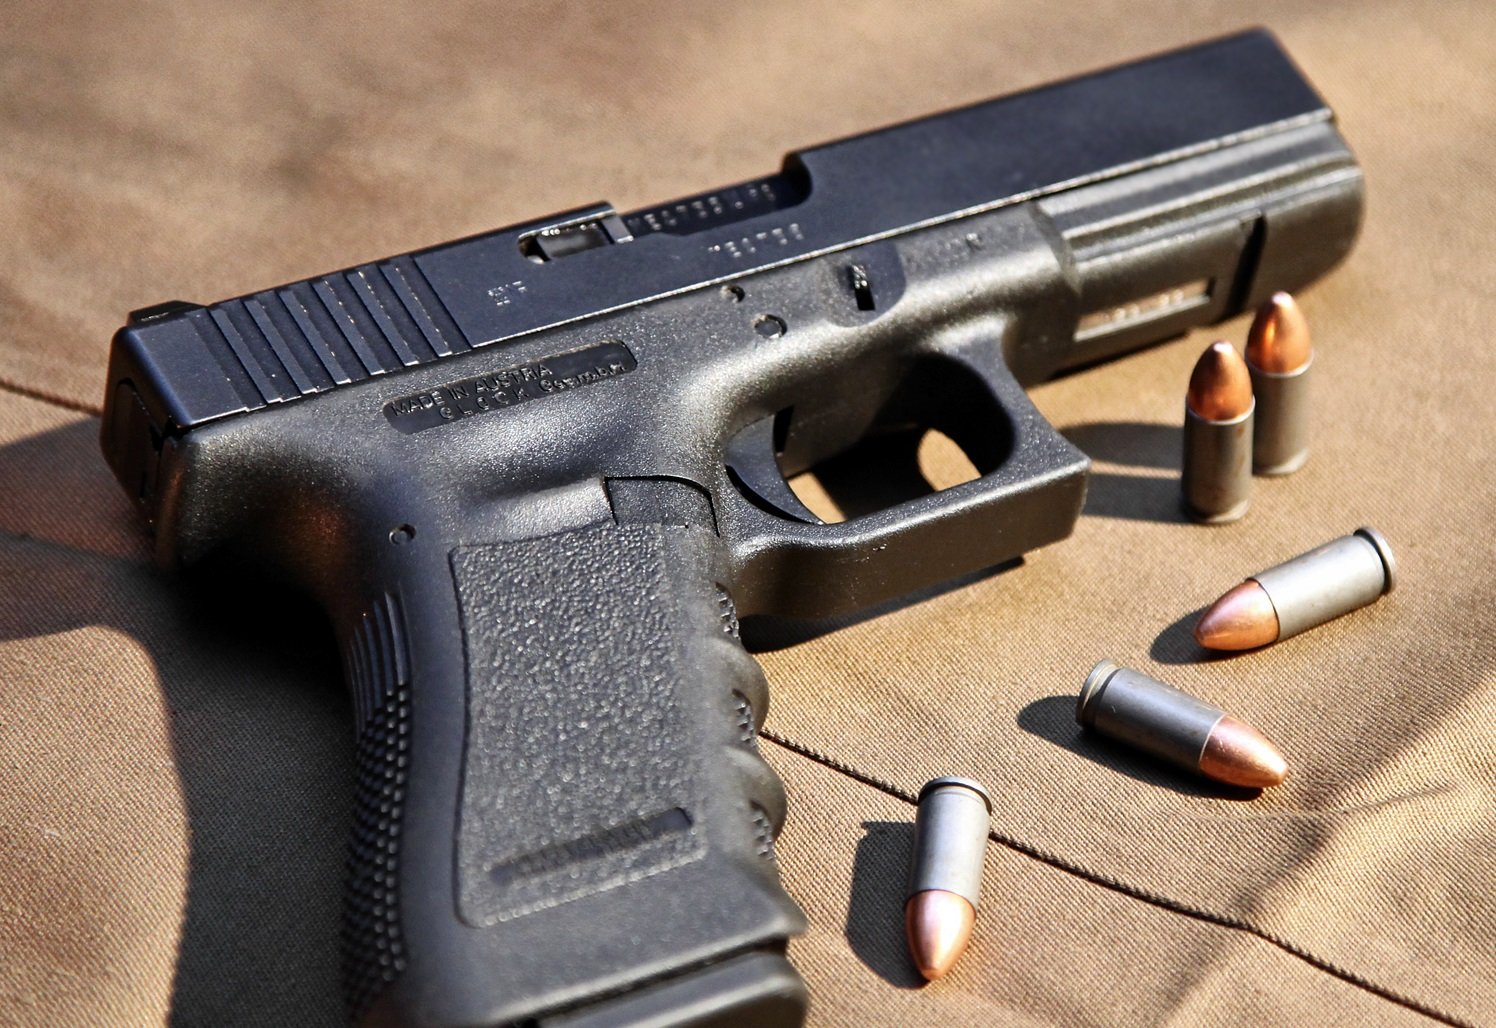 Glock The Gun That Dominates Over All of the Competition? The